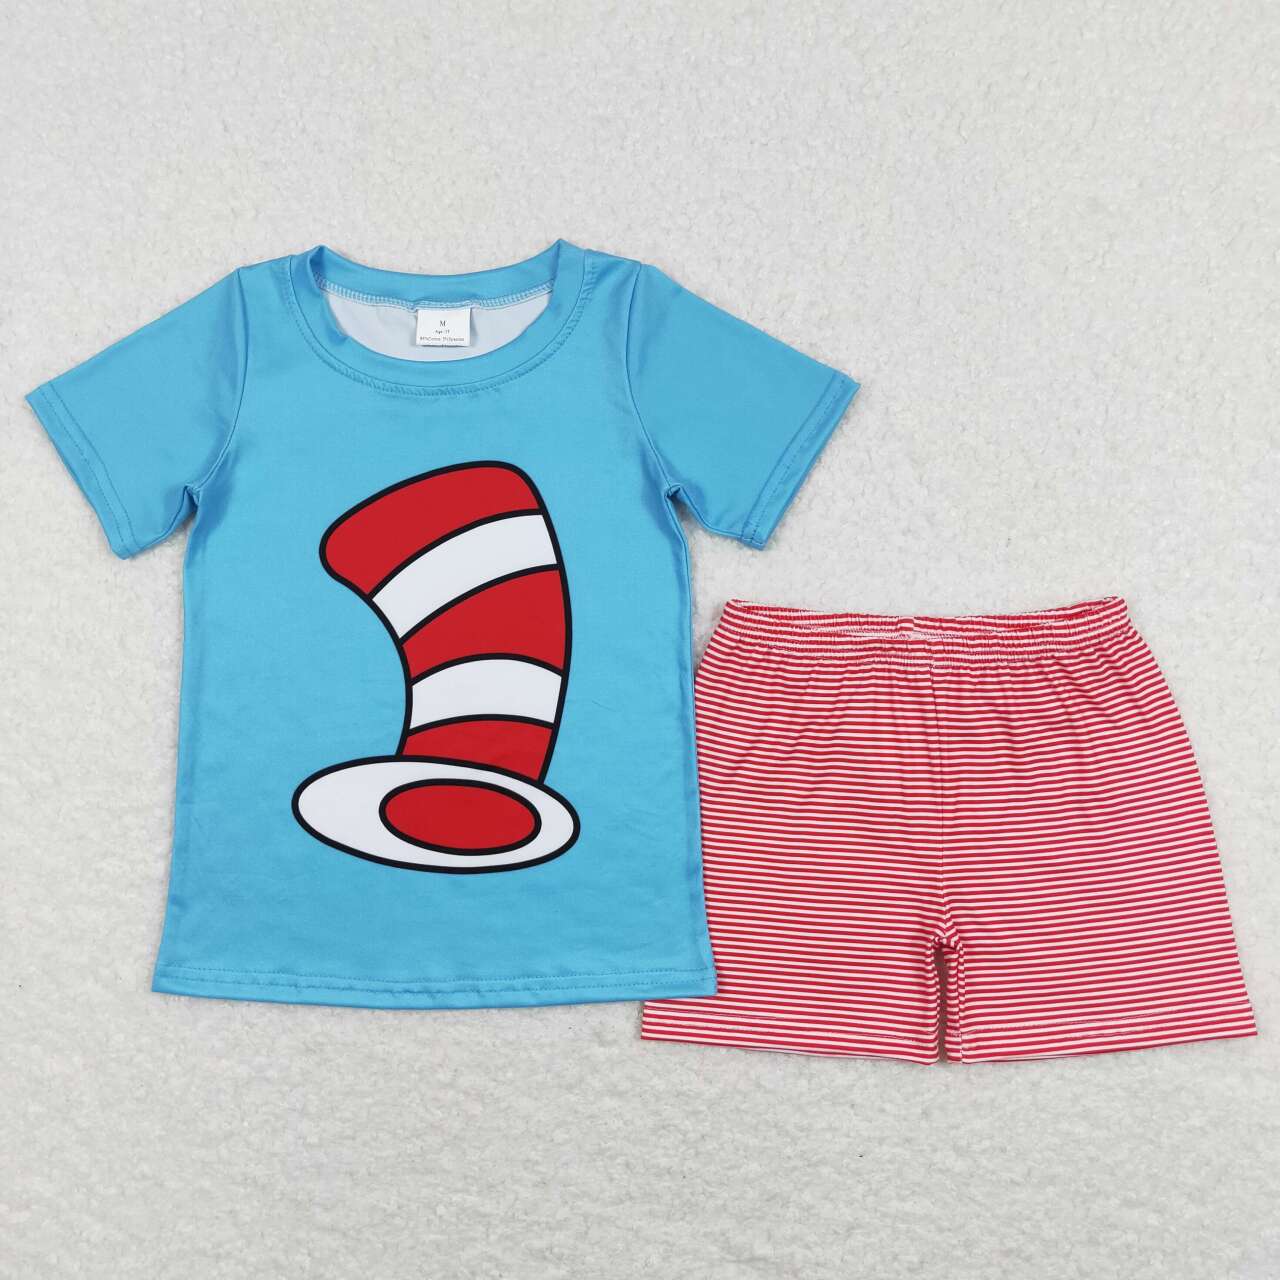 baby boy short sleeve dr clothing outfit